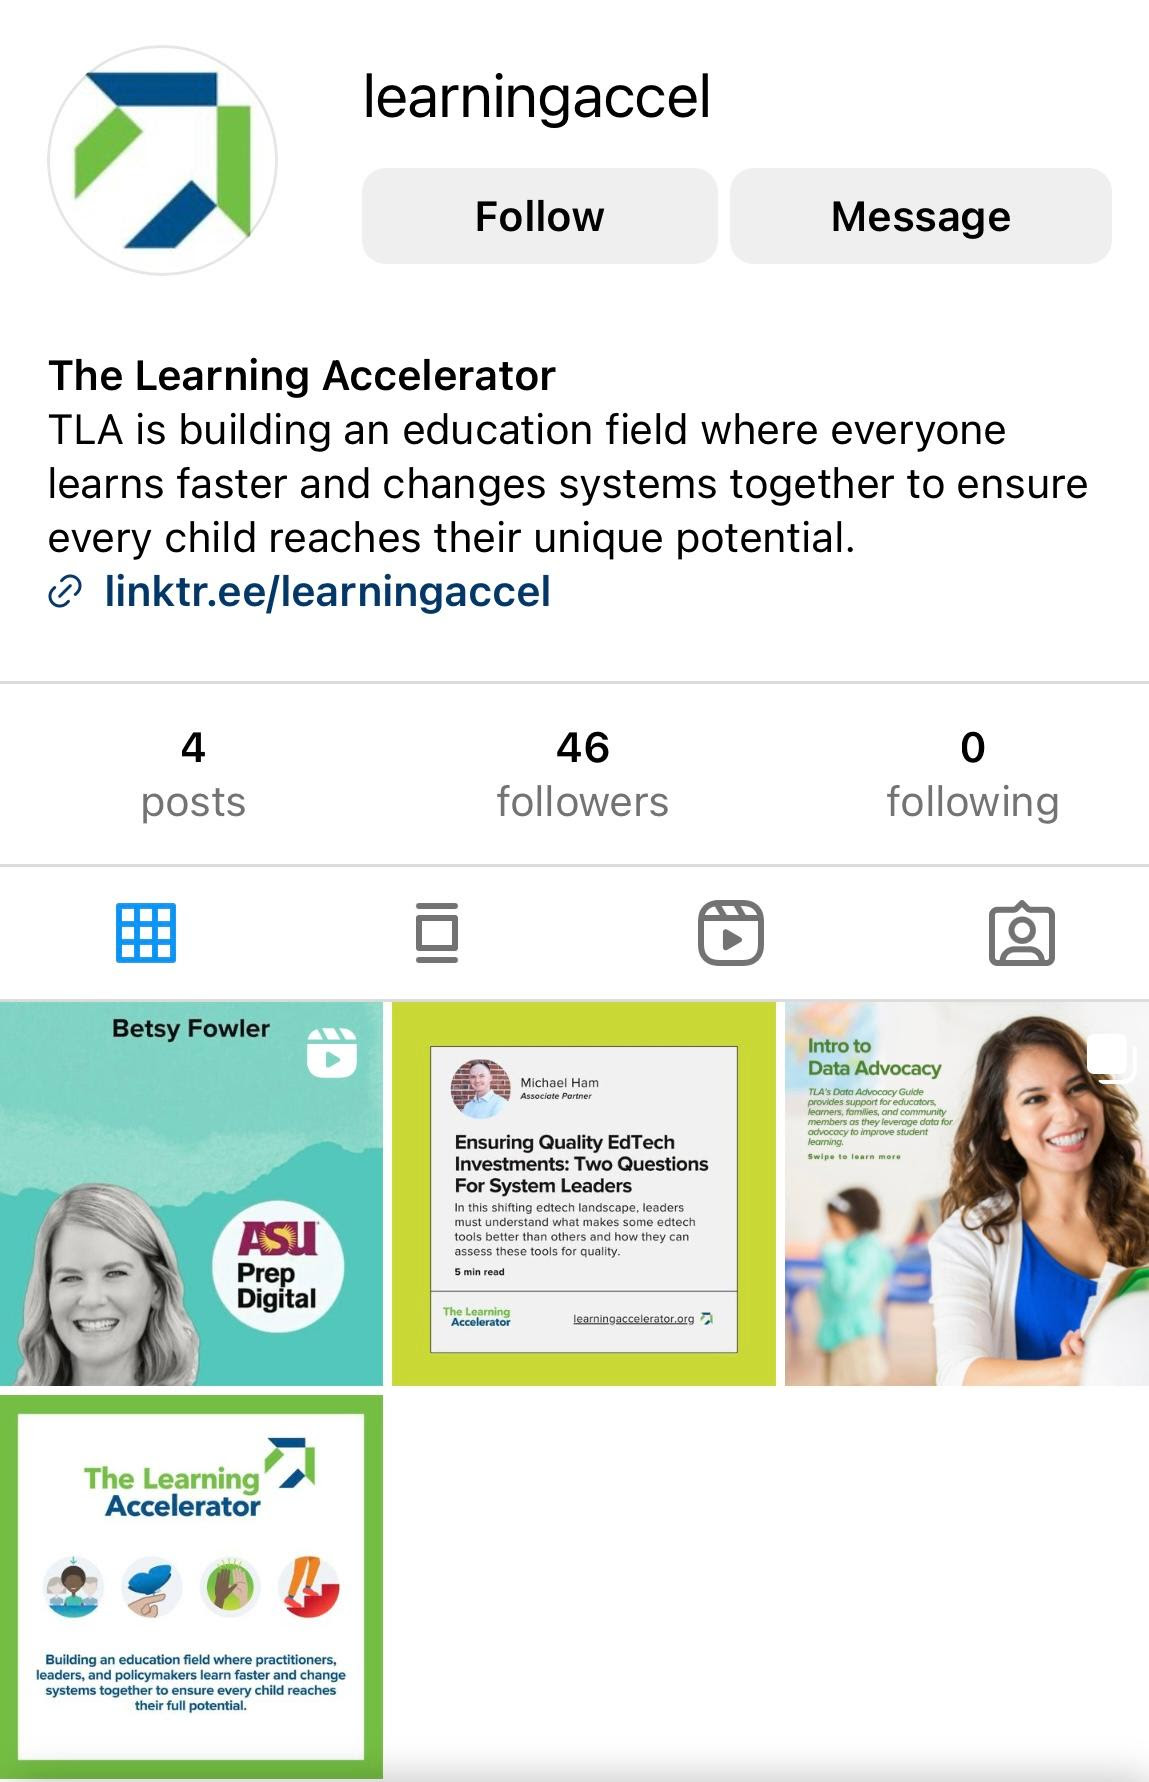 A screen grab of The Learning Accelerator's Instagram account page. On the left hand side, is the arrow logo and the account username "learningaccel." The bio states "TLA is building an education field where everyone learns faster and changes systems together to ensure every child reaches their unique potential." Under the bio is a link to TLA's linktree. There are three posts on the account (from left to right) promoting 1. A school profile podcast episode on ASU Prep digital, 2. a blog on Ed Tech Quality, 3. TLA's Digital Equity Guide, and 4. a post announcing TLA joining instagram.